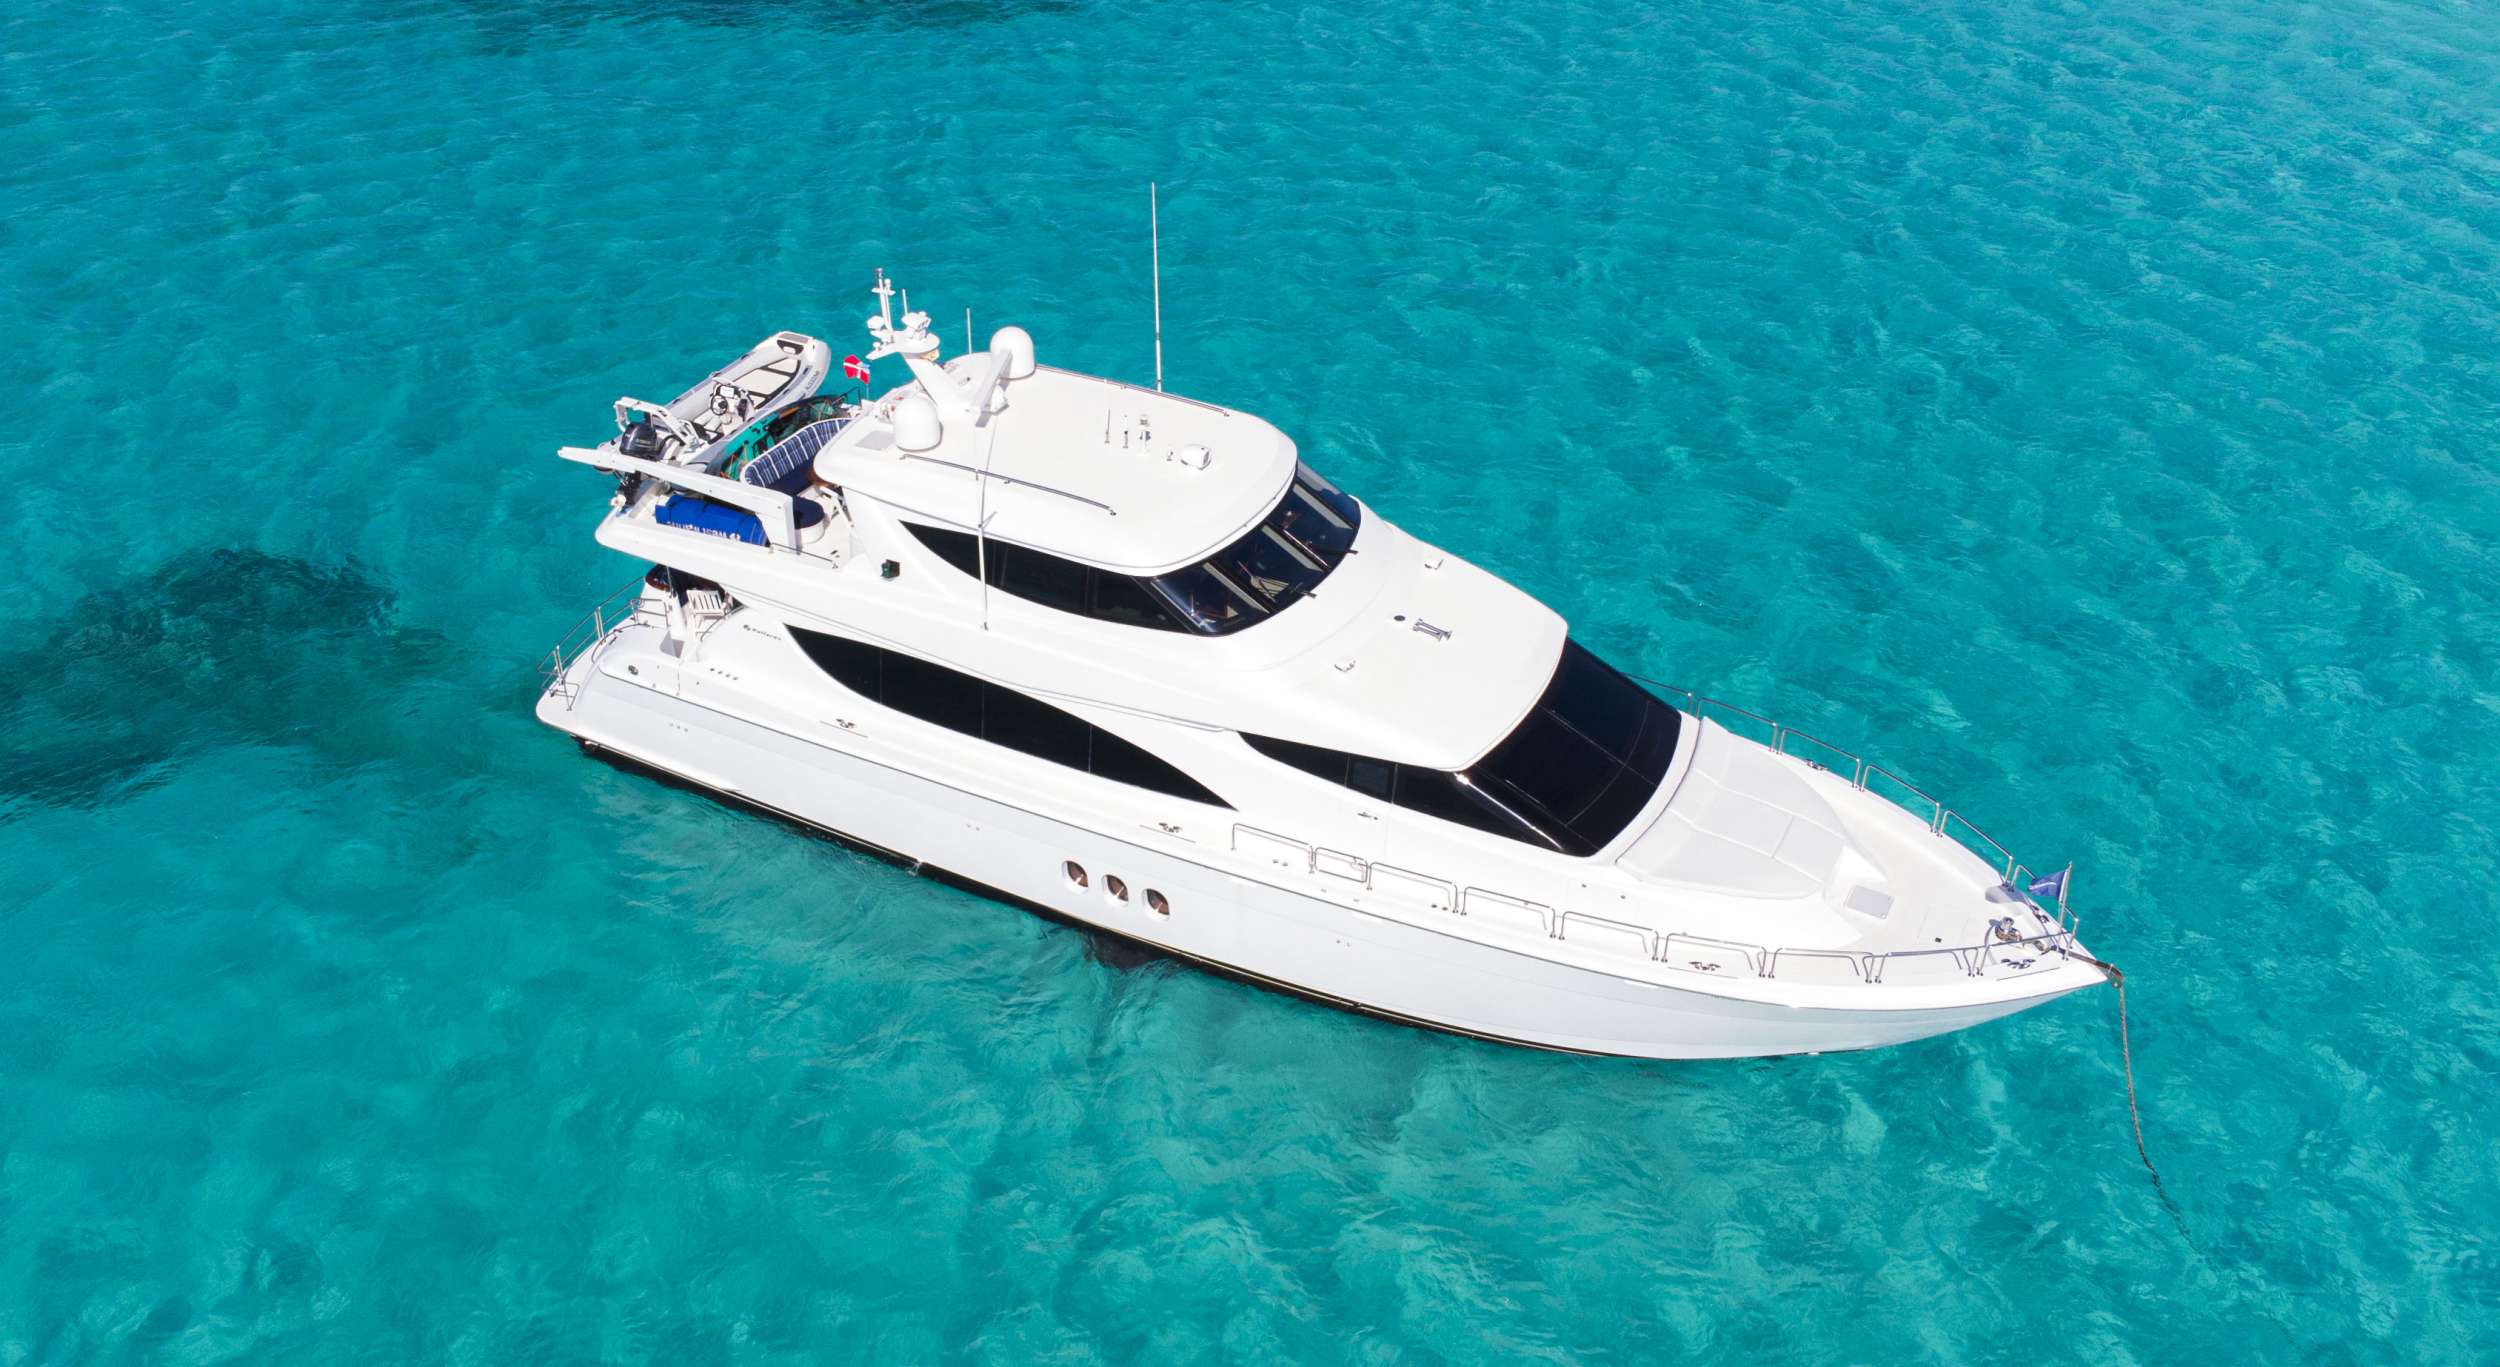 Gail Force II - Yacht Charter New England & Boat hire in US East Coast & Bahamas 1